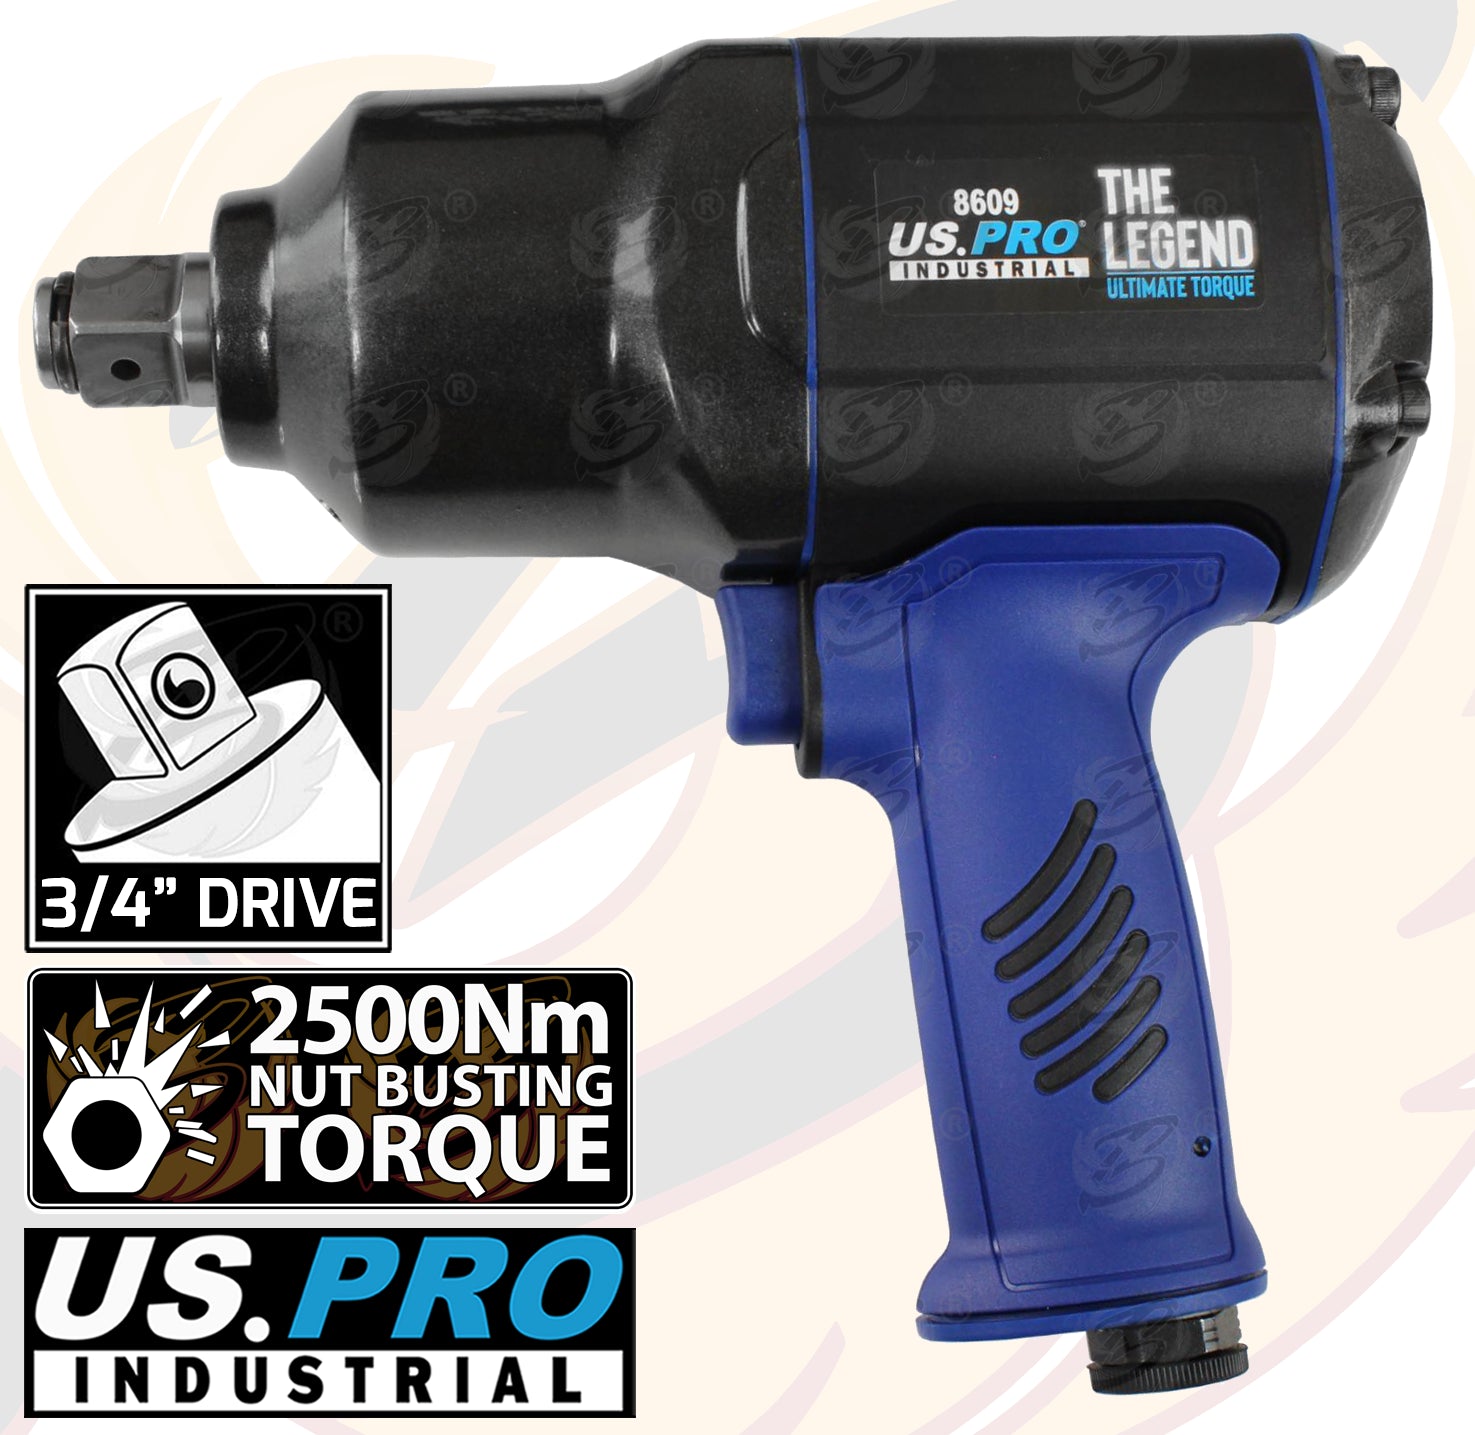 US PRO 3/4" DRIVE AIR IMPACT WRENCH 2500Nm ( THE LEGEND )